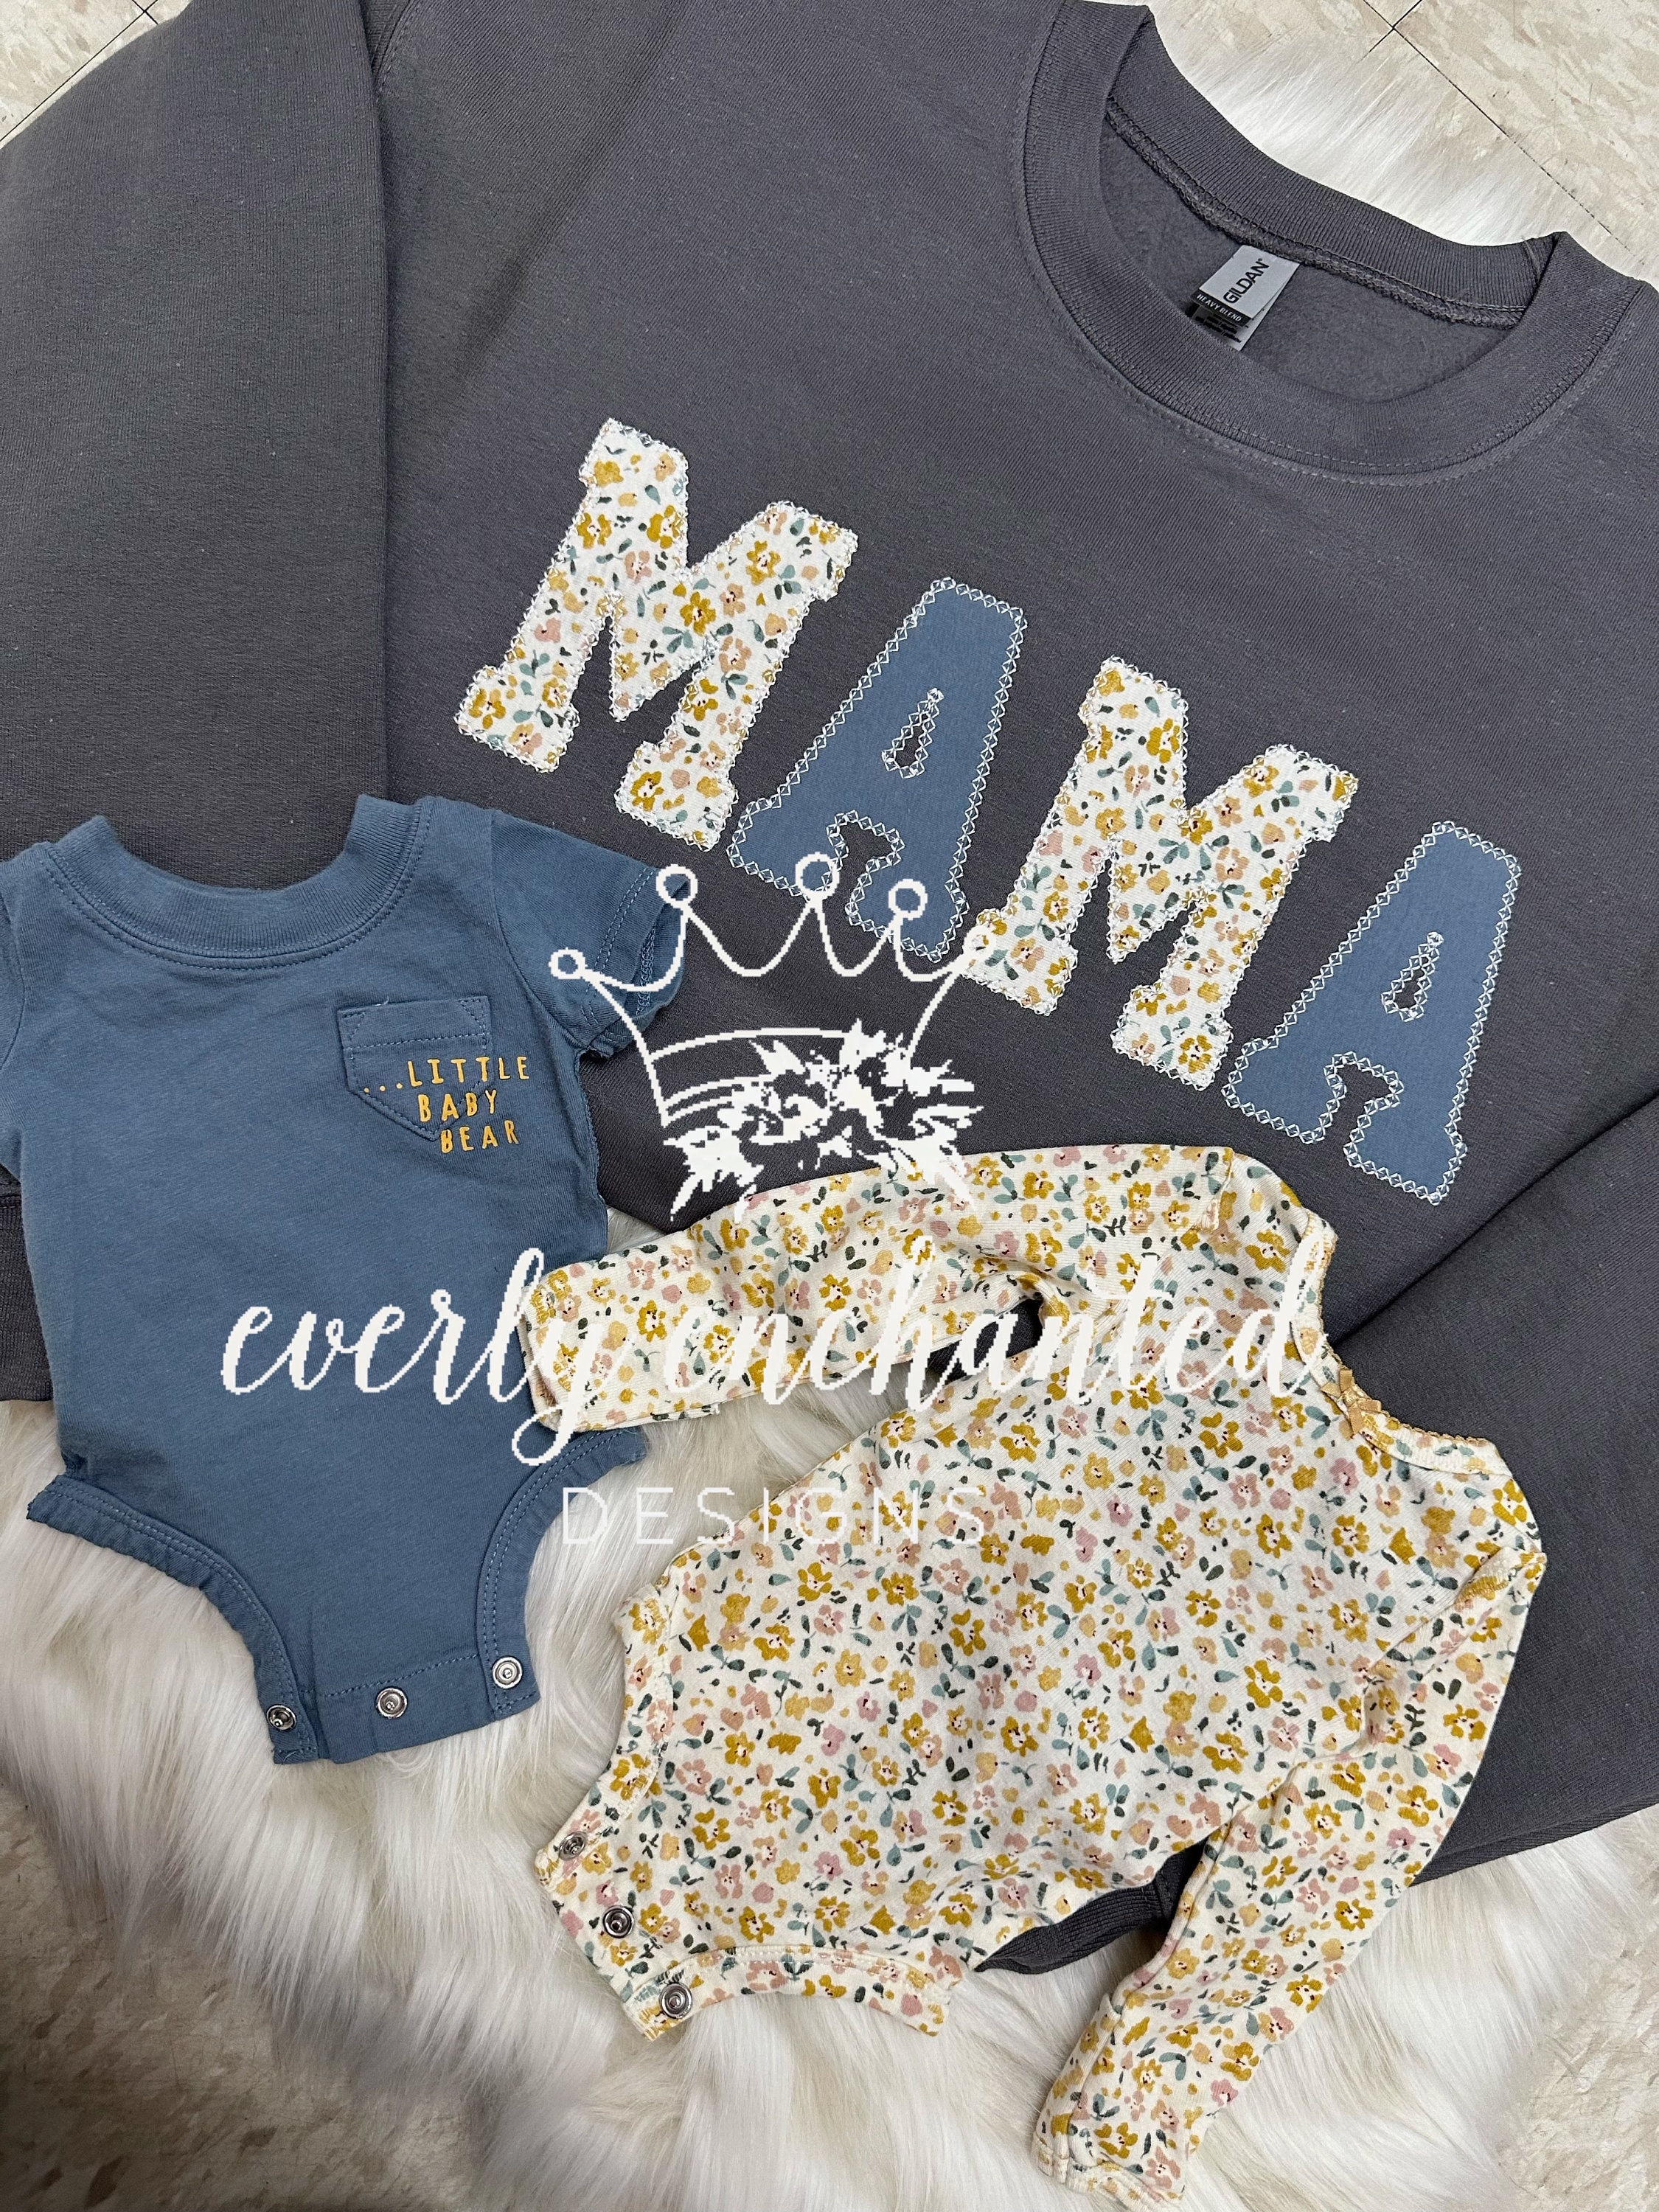 10 Ways To Save Money On Baby Clothes - Modern Mama